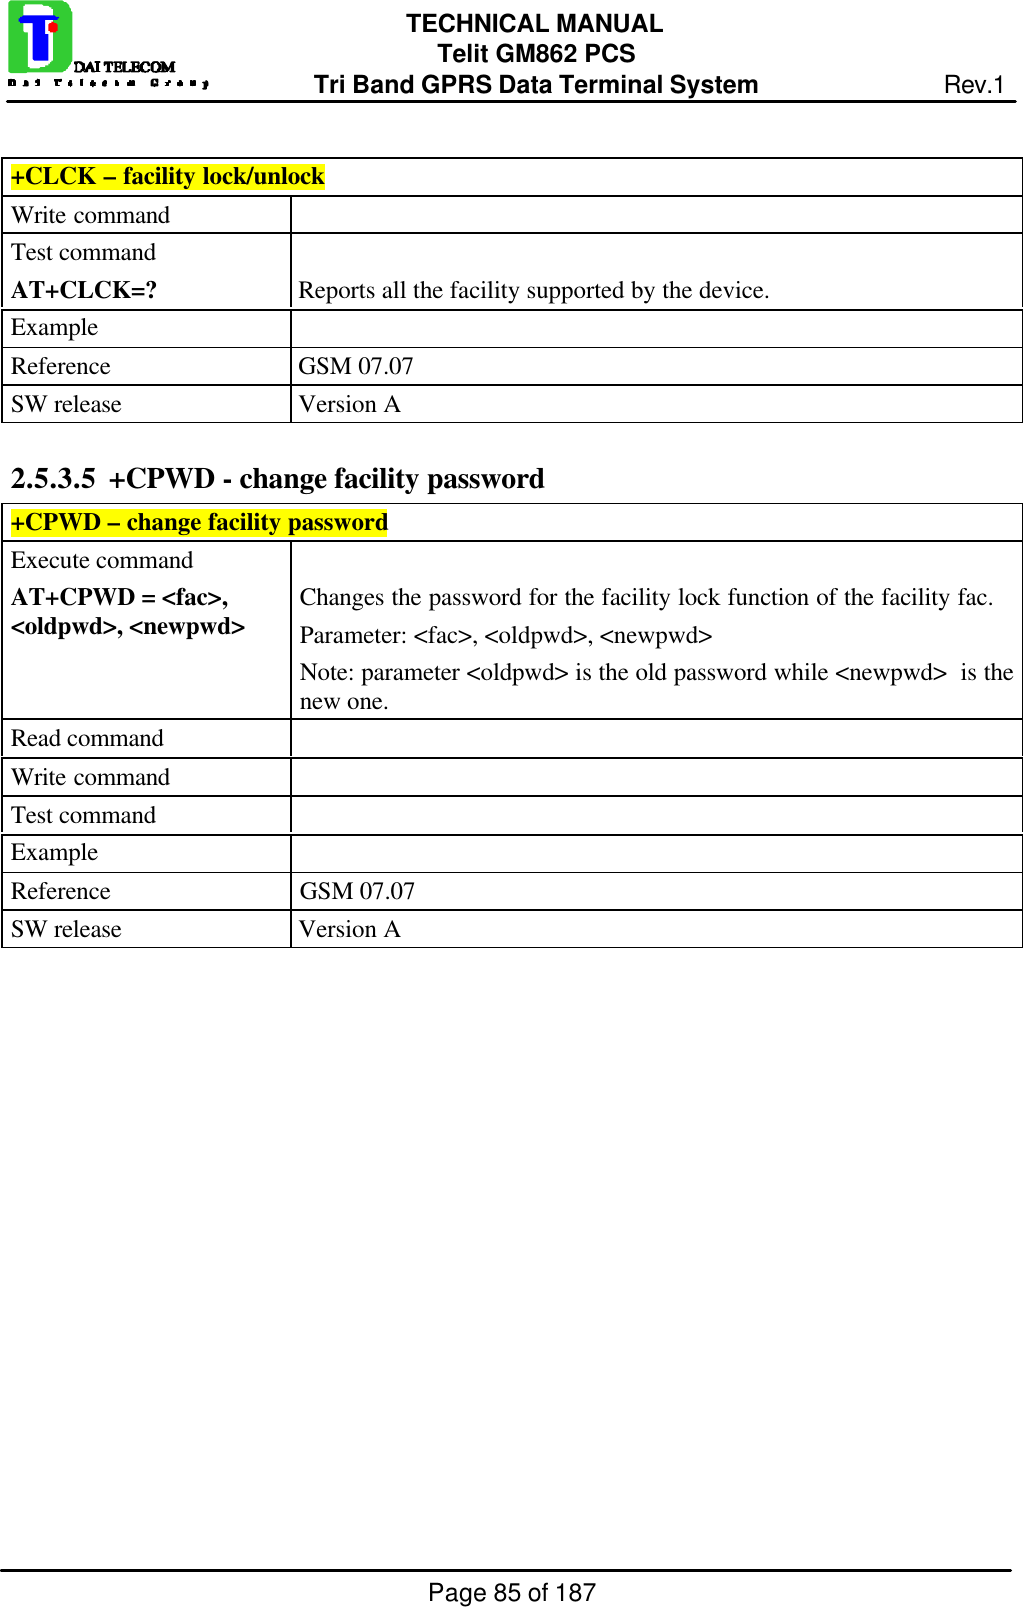 Page 85 of 187TECHNICAL MANUALTelit GM862 PCSTri Band GPRS Data Terminal System Rev.1+CLCK – facility lock/unlockWrite commandTest commandAT+CLCK=? Reports all the facility supported by the device.ExampleReference GSM 07.07SW release Version A2.5.3.5  +CPWD - change facility password+CPWD – change facility passwordExecute commandAT+CPWD = &lt;fac&gt;,&lt;oldpwd&gt;, &lt;newpwd&gt; Changes the password for the facility lock function of the facility fac.Parameter: &lt;fac&gt;, &lt;oldpwd&gt;, &lt;newpwd&gt;Note: parameter &lt;oldpwd&gt; is the old password while &lt;newpwd&gt;  is thenew one.Read commandWrite commandTest commandExampleReference GSM 07.07SW release Version A